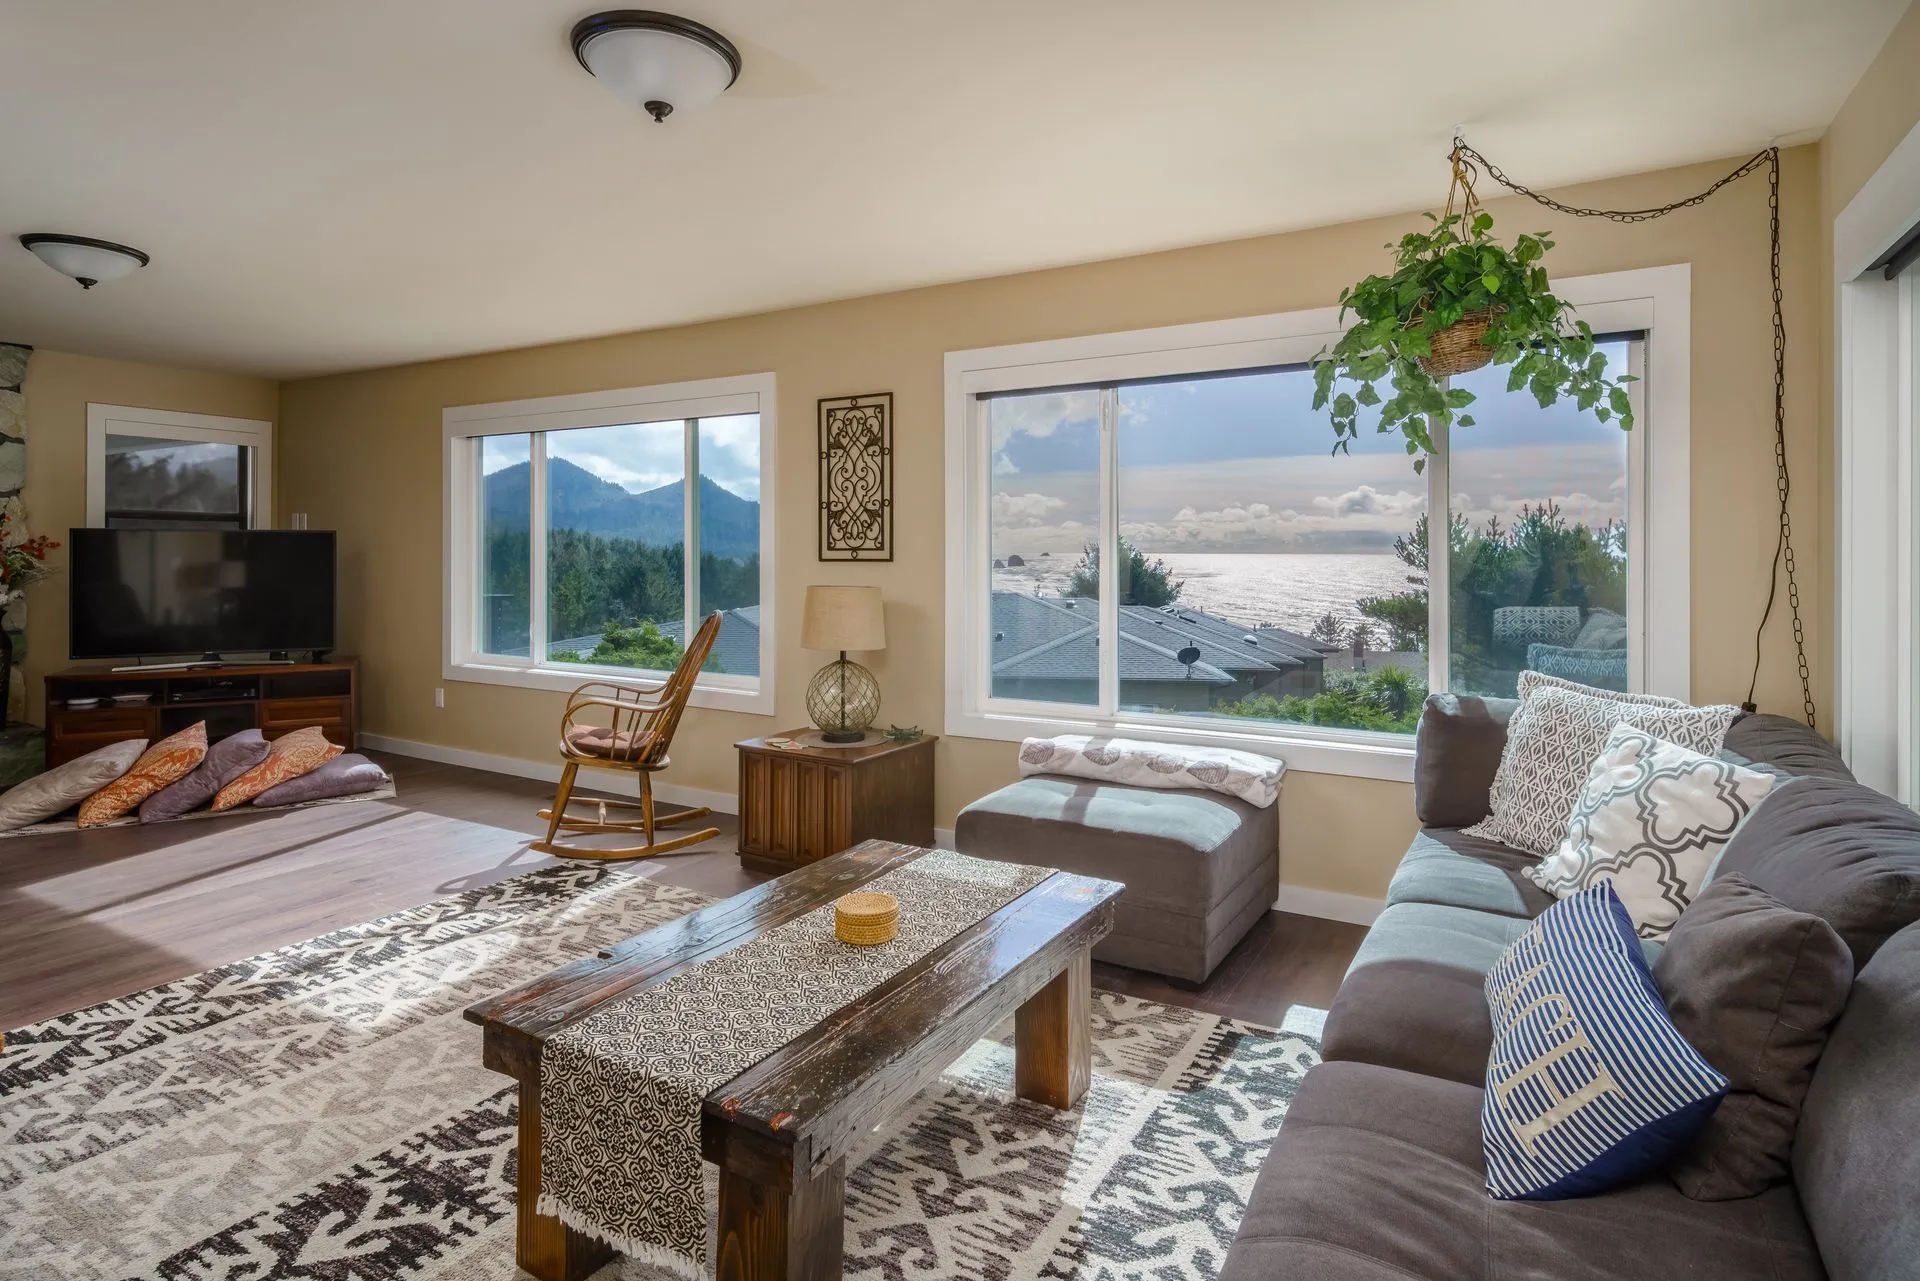 Vacation Rental in Cannon Beach, Anchor's Retreat living room with a couch, table, TV and view of the ocean